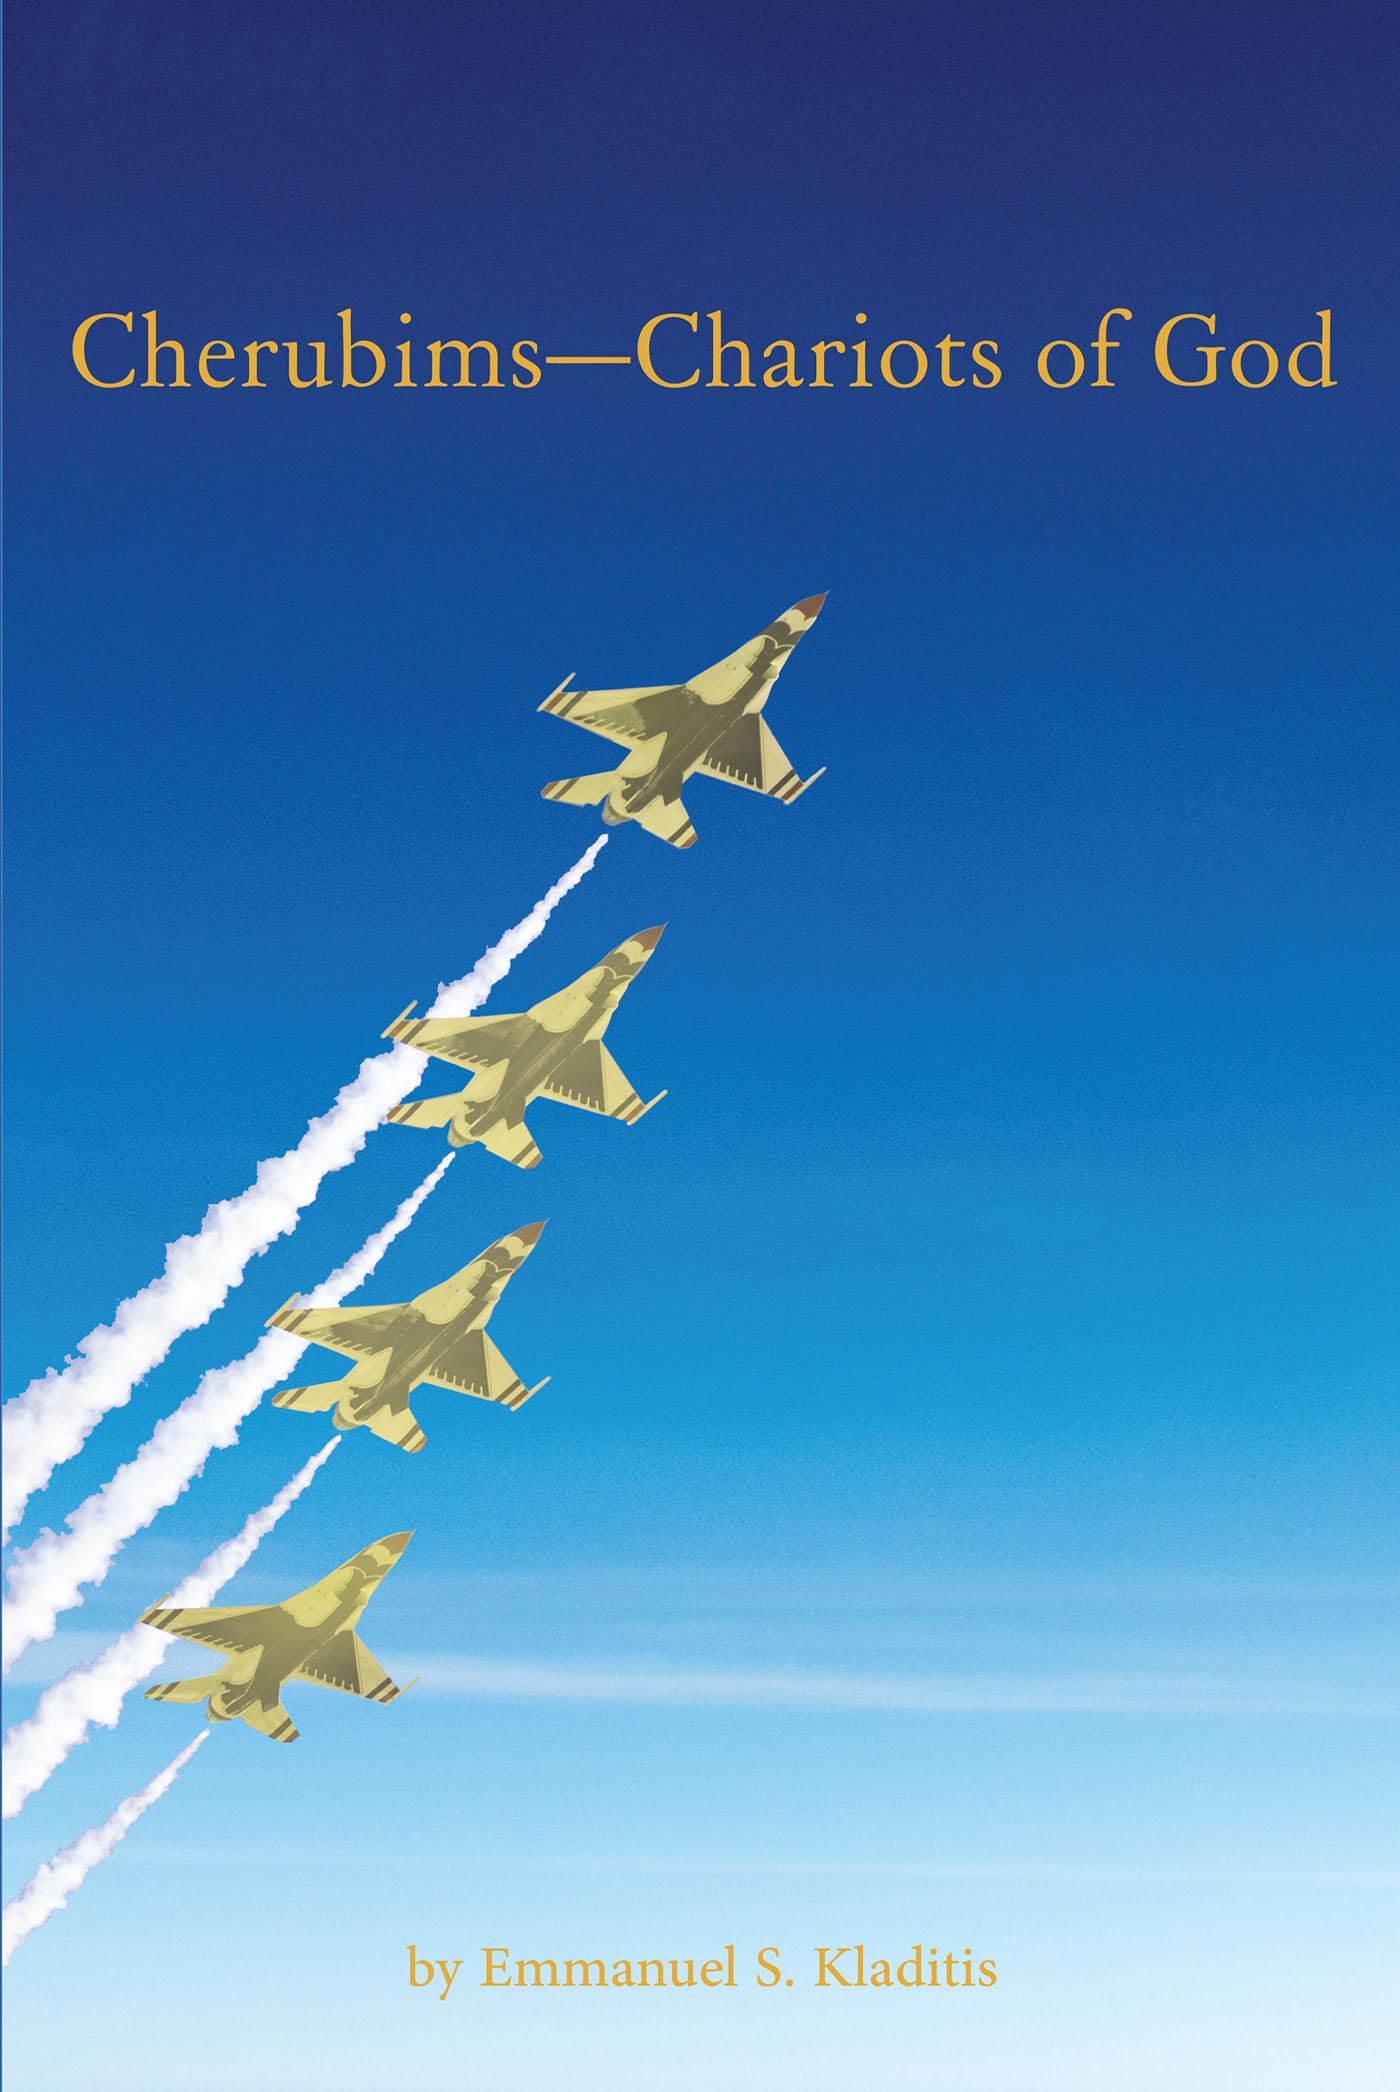 Emmanuel S. Kladitis’s Newly Released "Cherubims—Chariots of God" is an Engaging Study of What the Cherubims Are Within Scripture